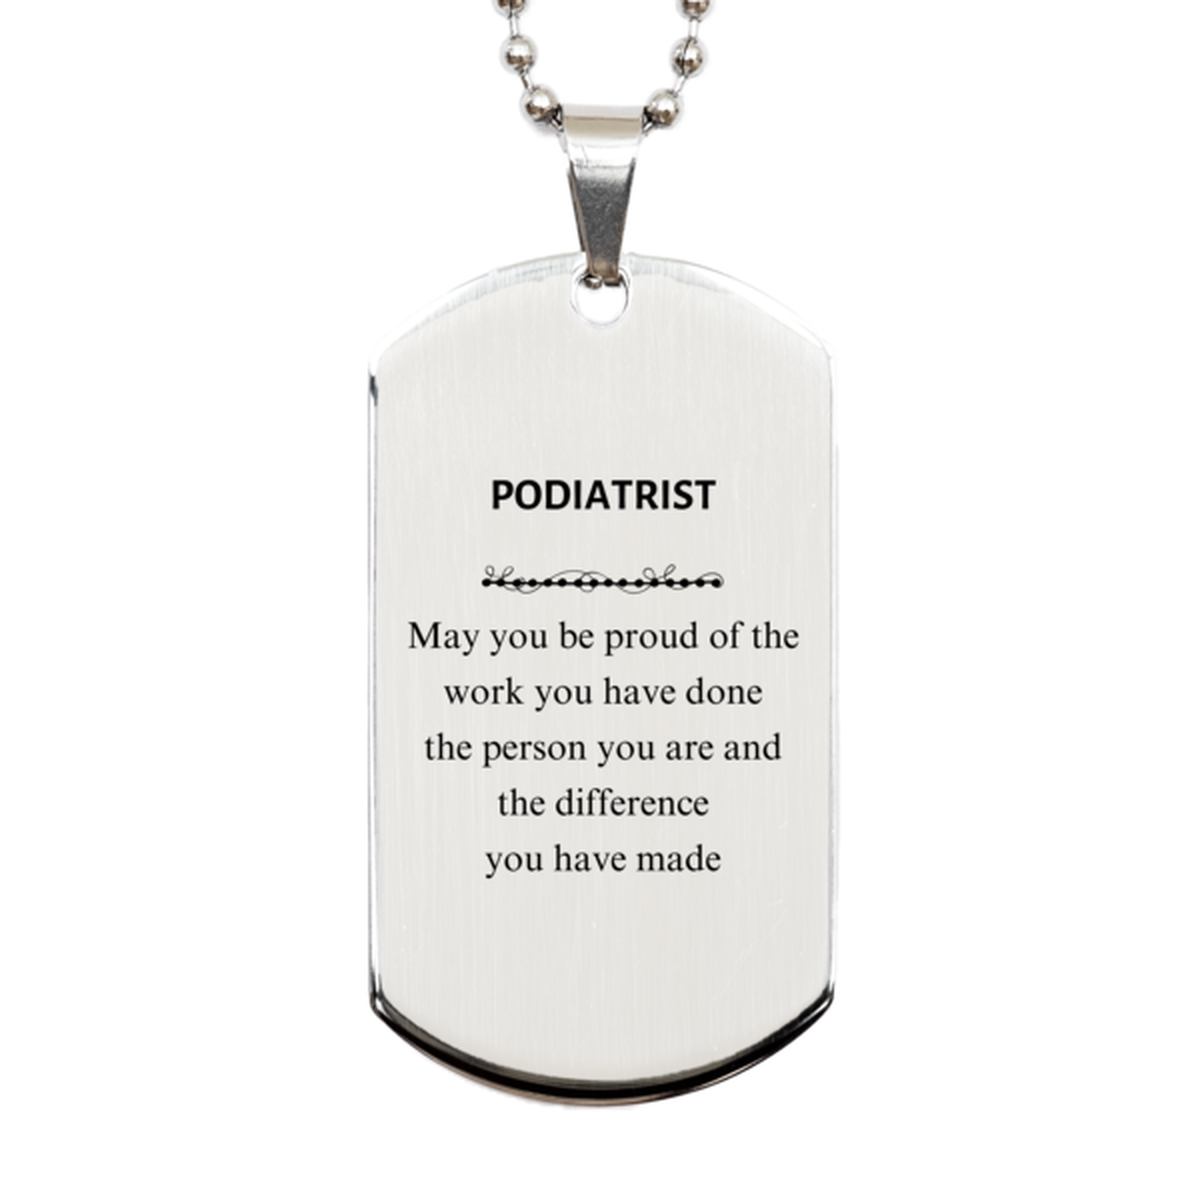 Podiatrist May you be proud of the work you have done, Retirement Podiatrist Silver Dog Tag for Colleague Appreciation Gifts Amazing for Podiatrist